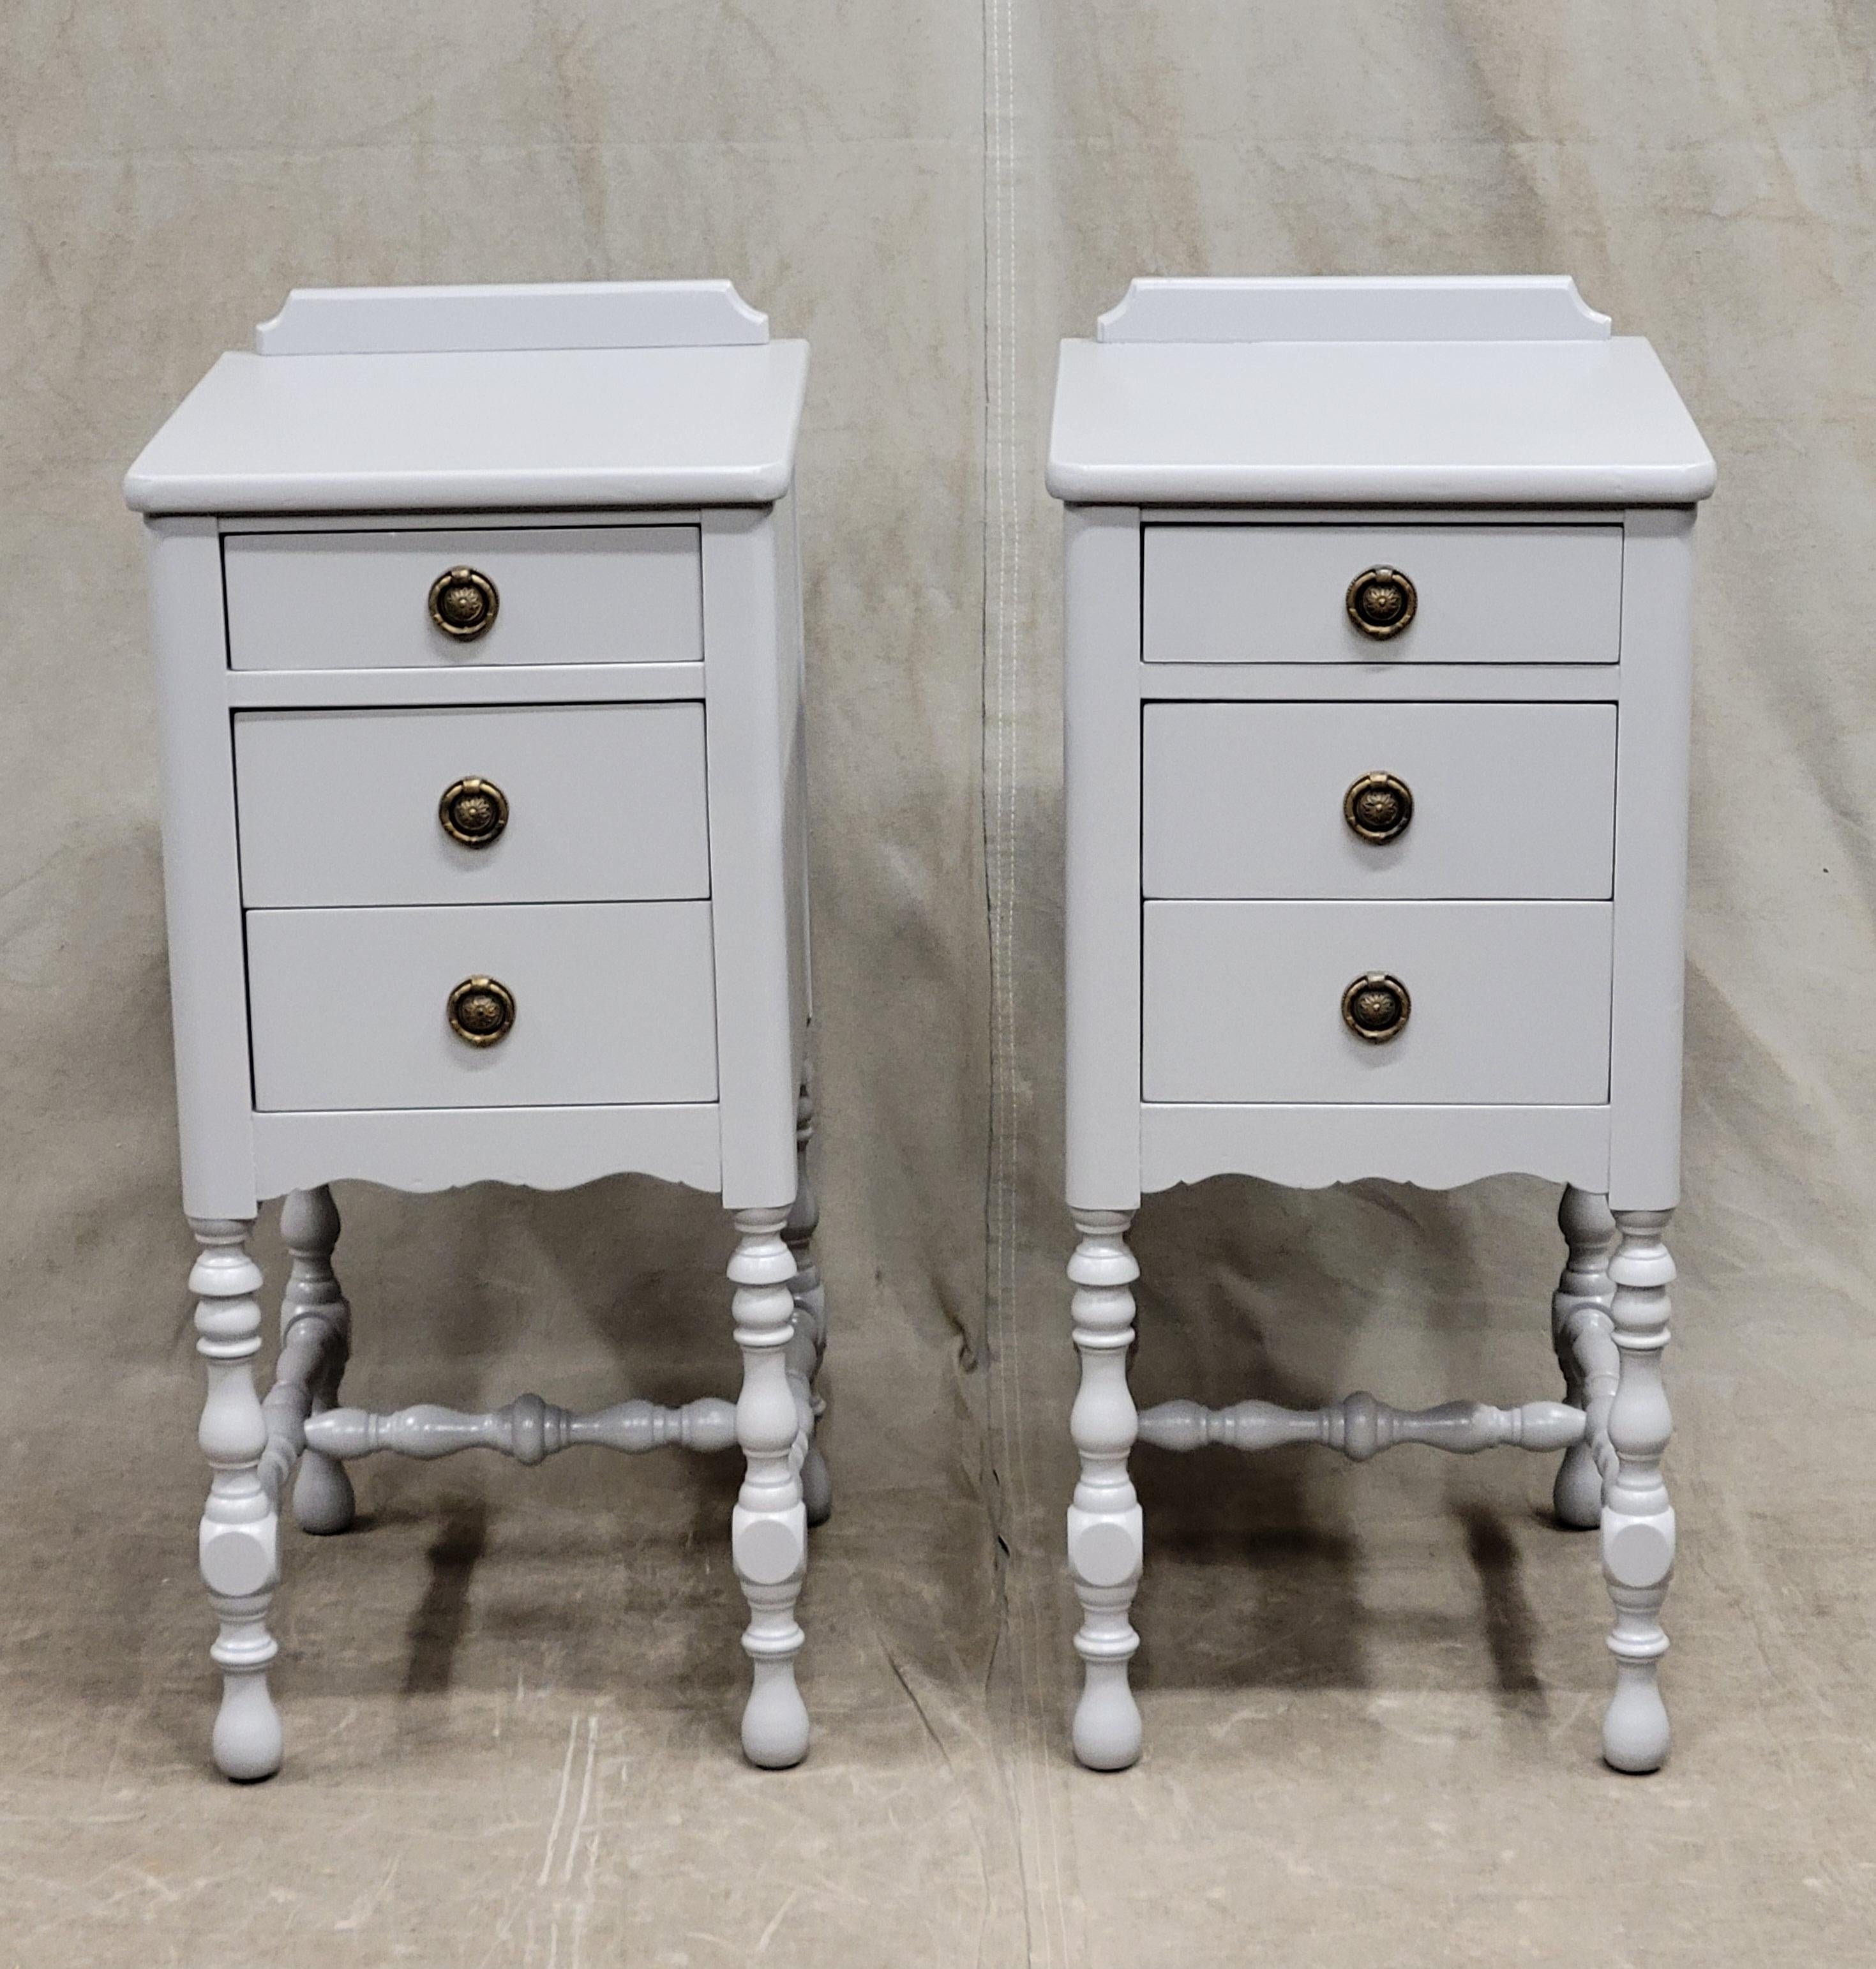 This is a beautiful and functional pair of vintage 1940s nightstands have been recently painted with Gustavian gray paint. Brass drawer pulls are replacements. Three drawers in each nightstand offer ample storage. Turned legs give this set such